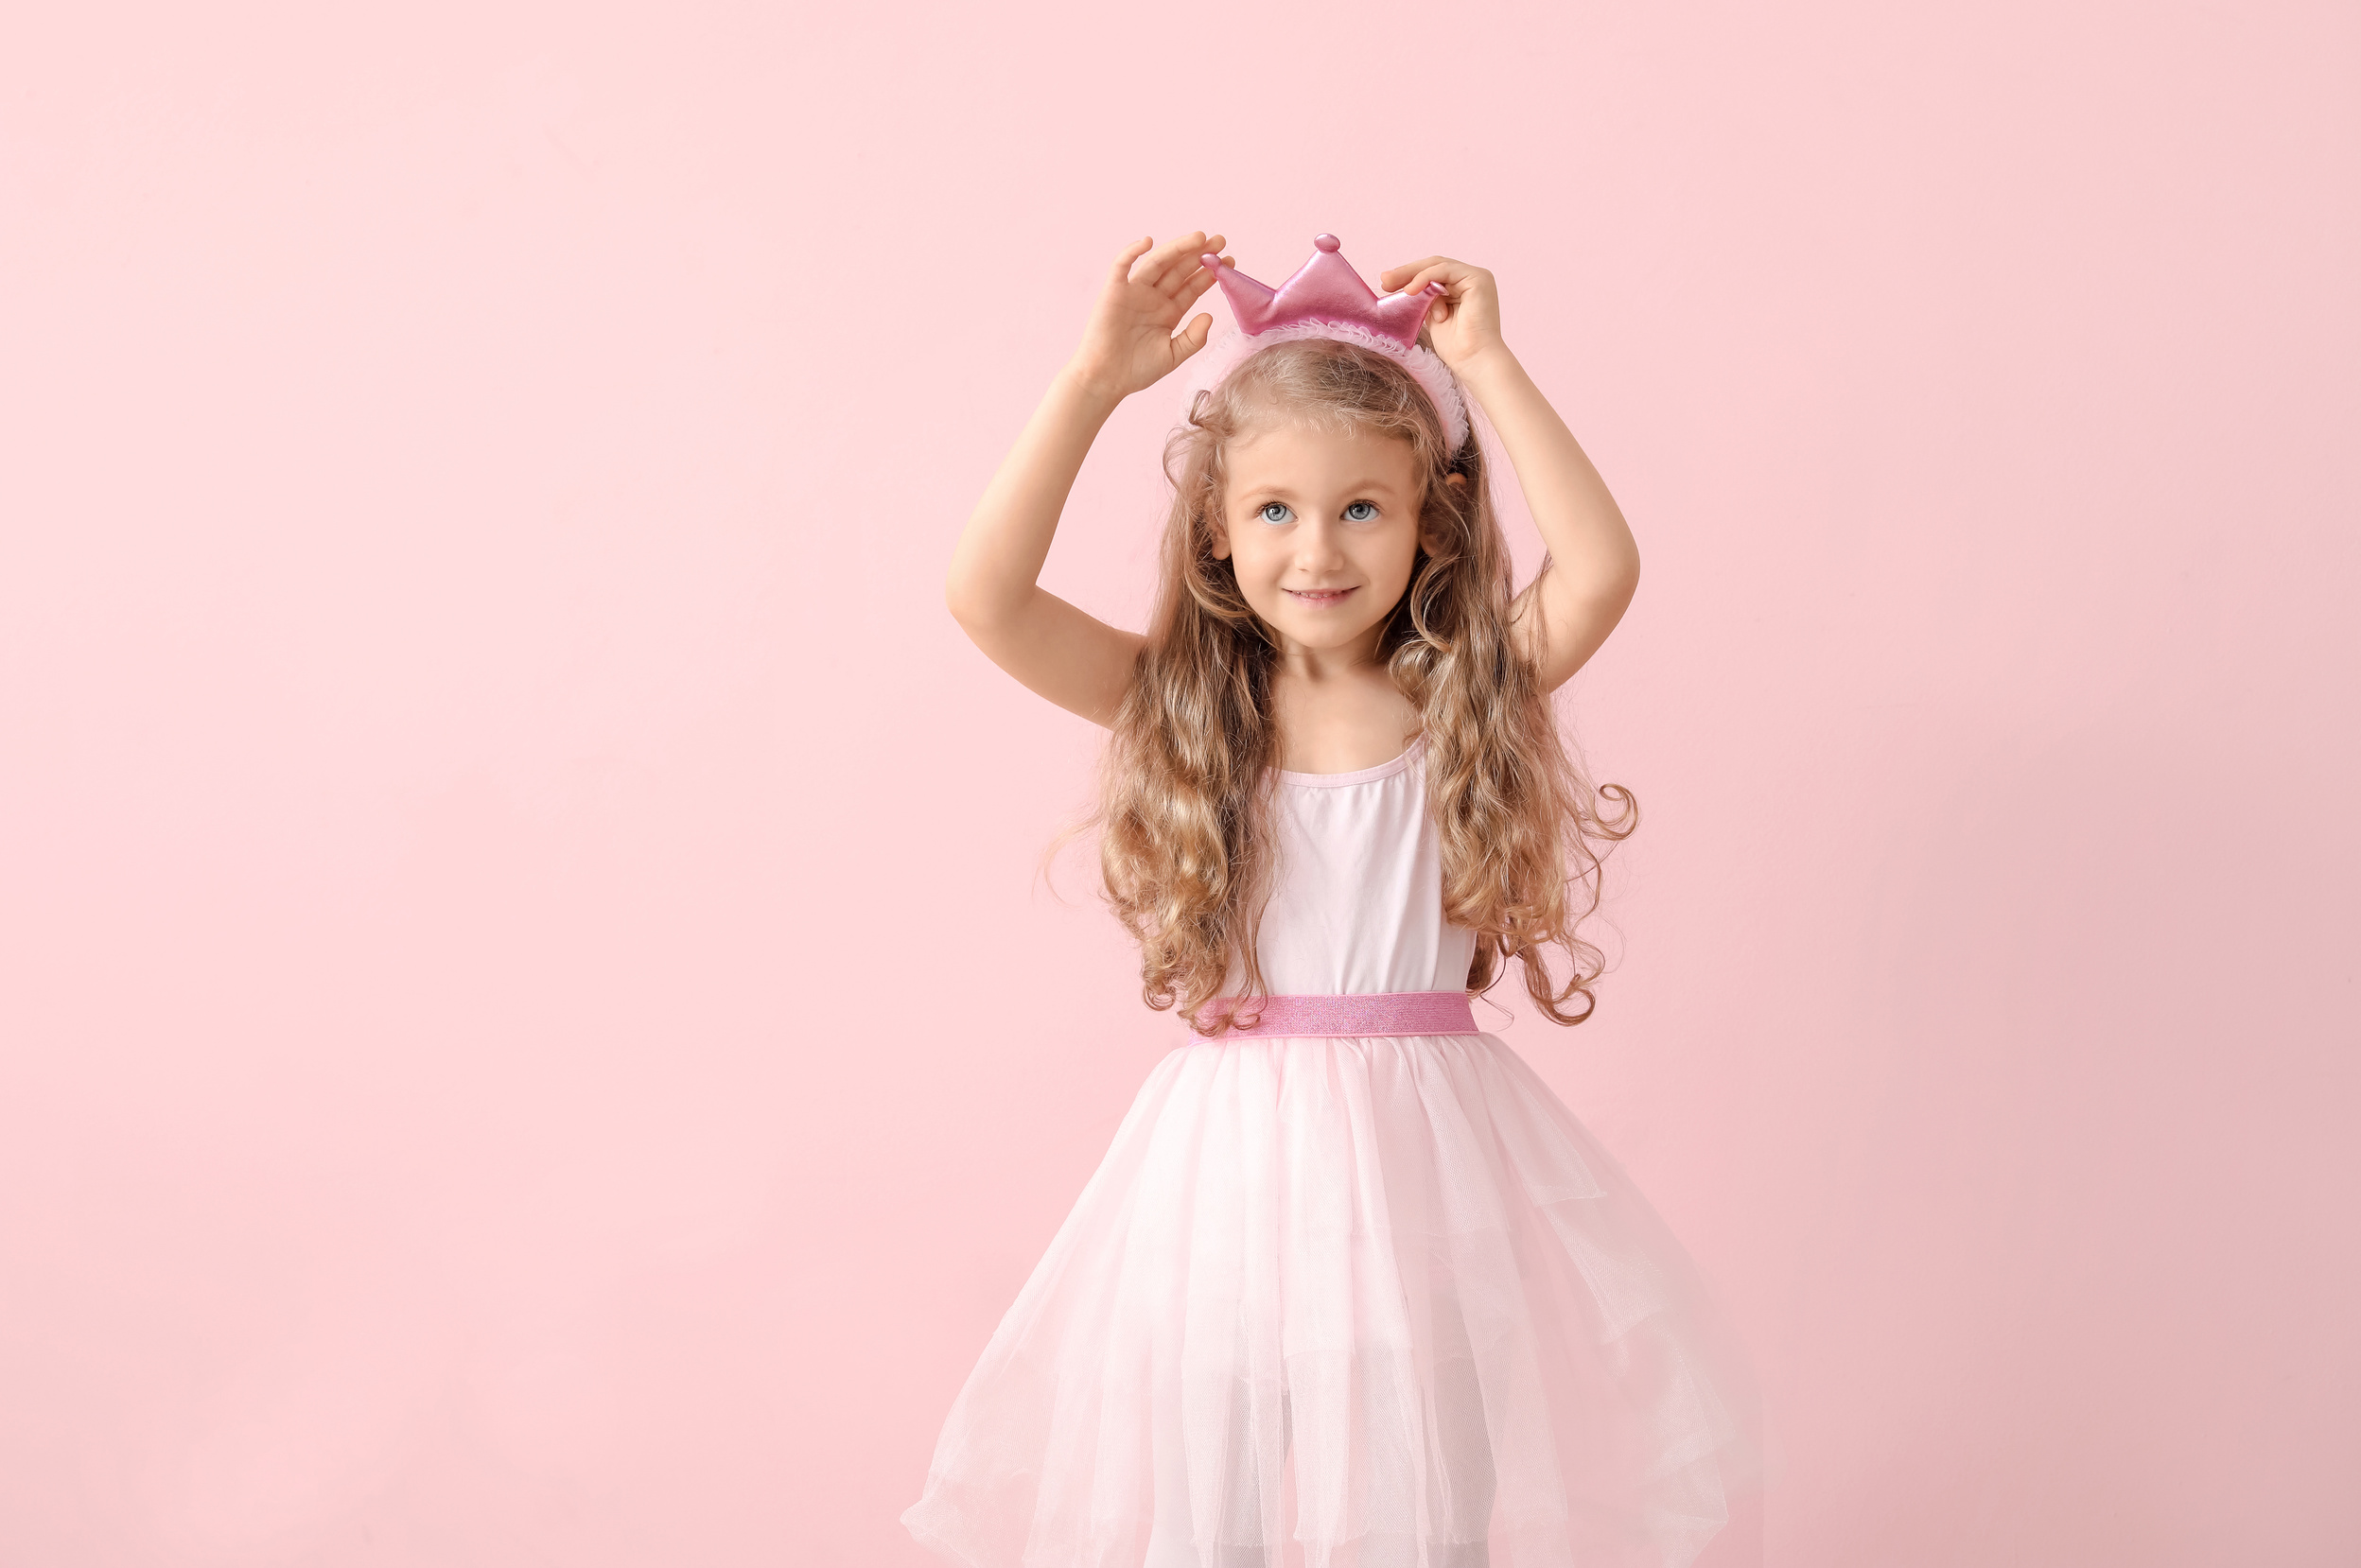 Girl Wearing Princess Costume on Pink Background